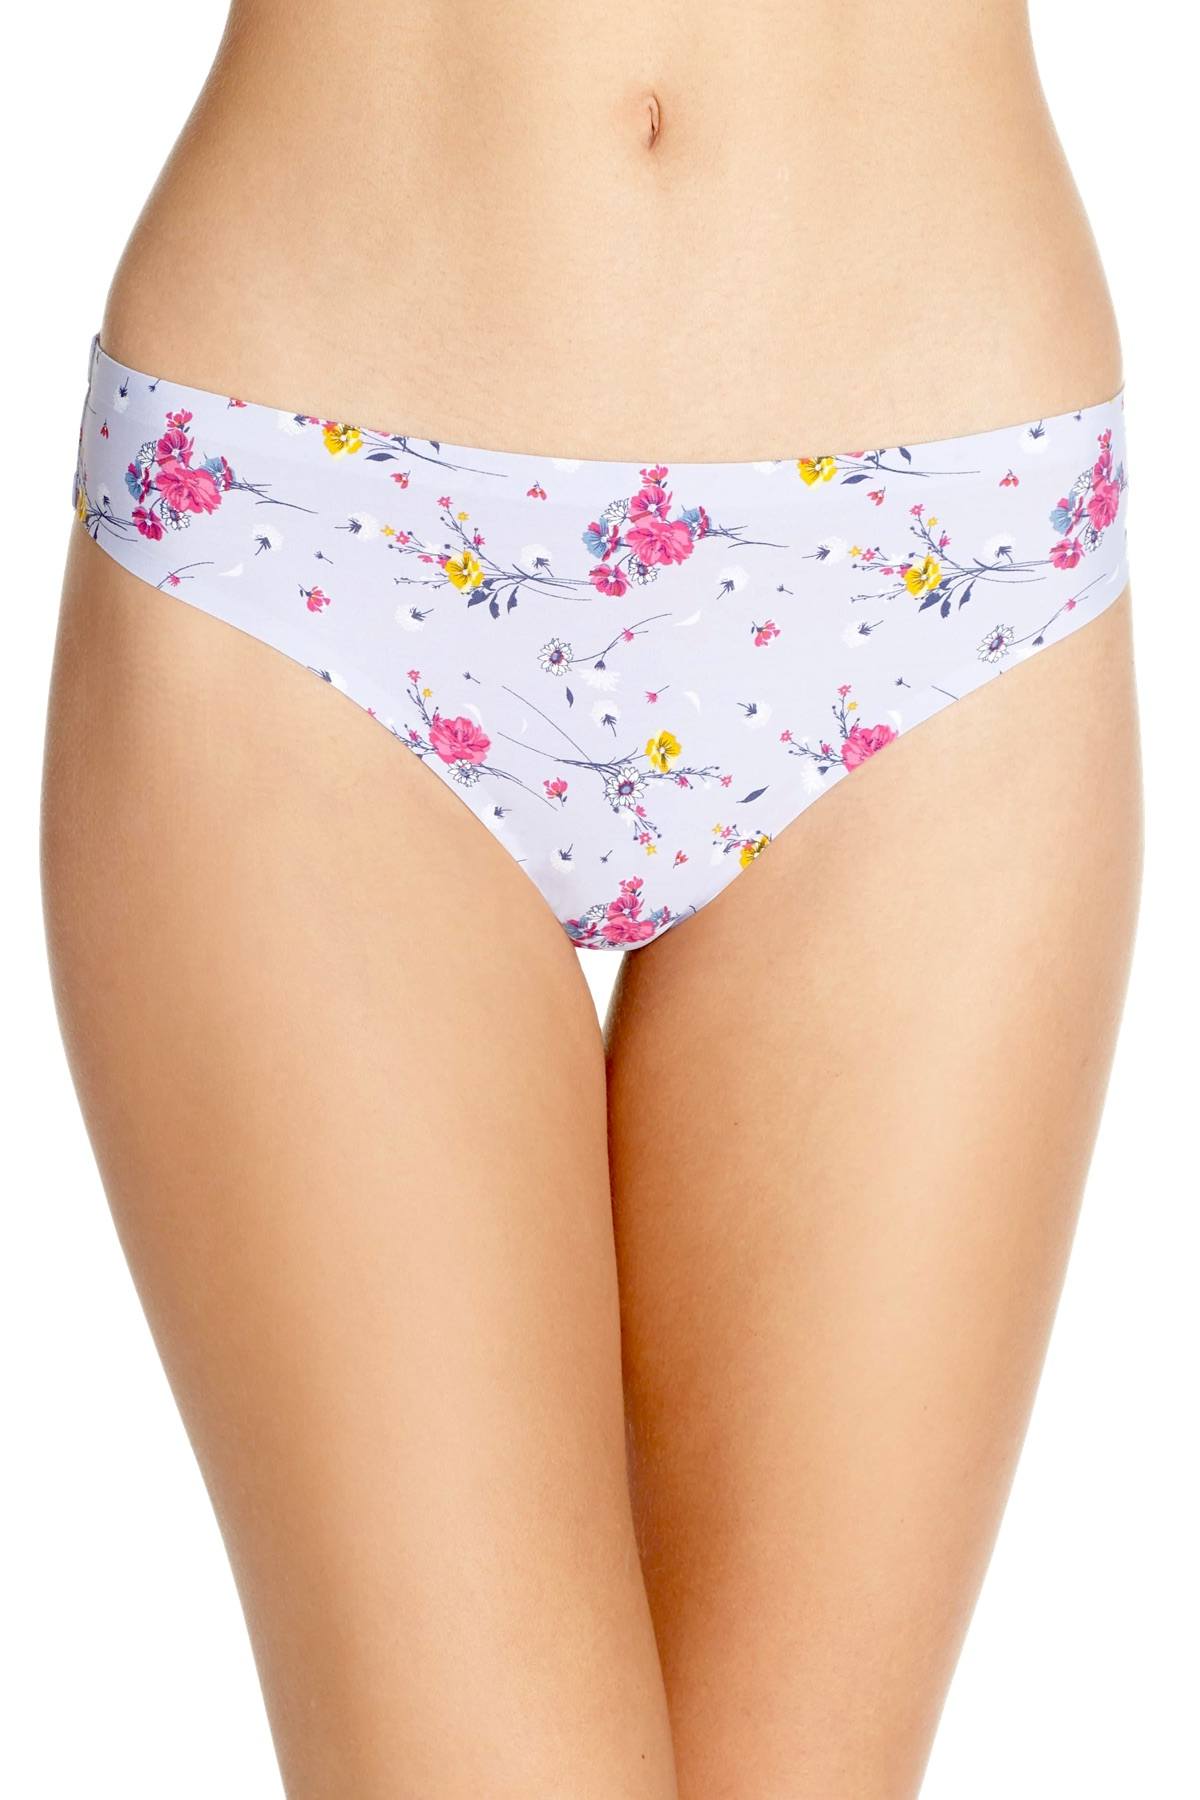 Honeydew Intimates Low Tide Floral Printed Skinz Thong